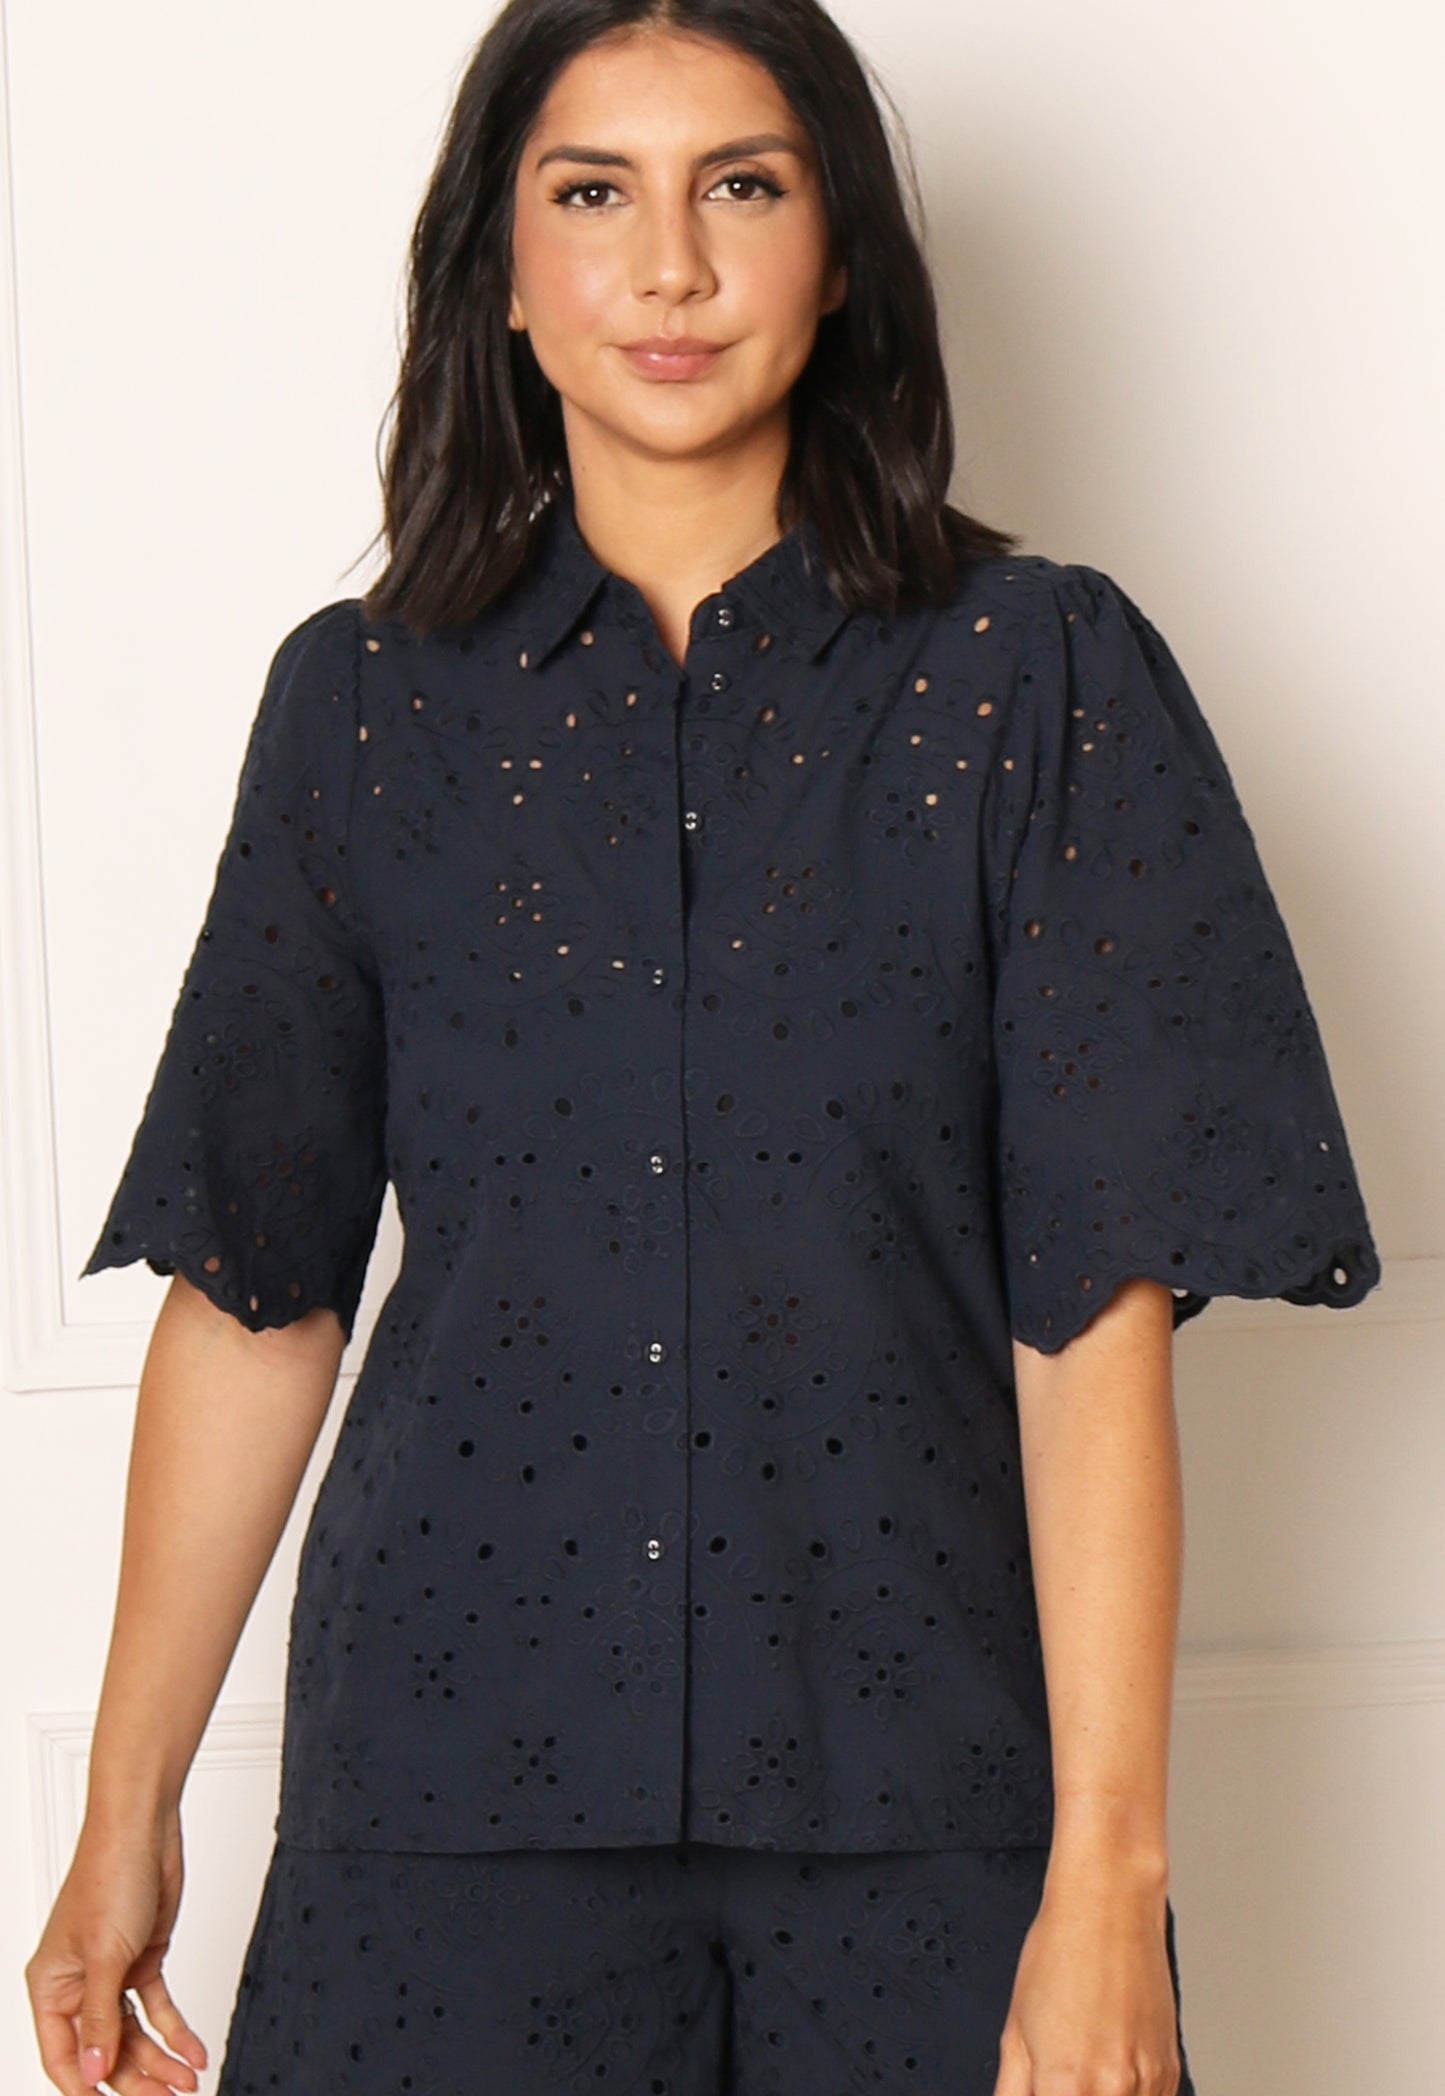 VERO MODA Hay Broderie Anglaise Lace Short Sleeve Co-ord Shirt in Navy Blue - One Nation Clothing